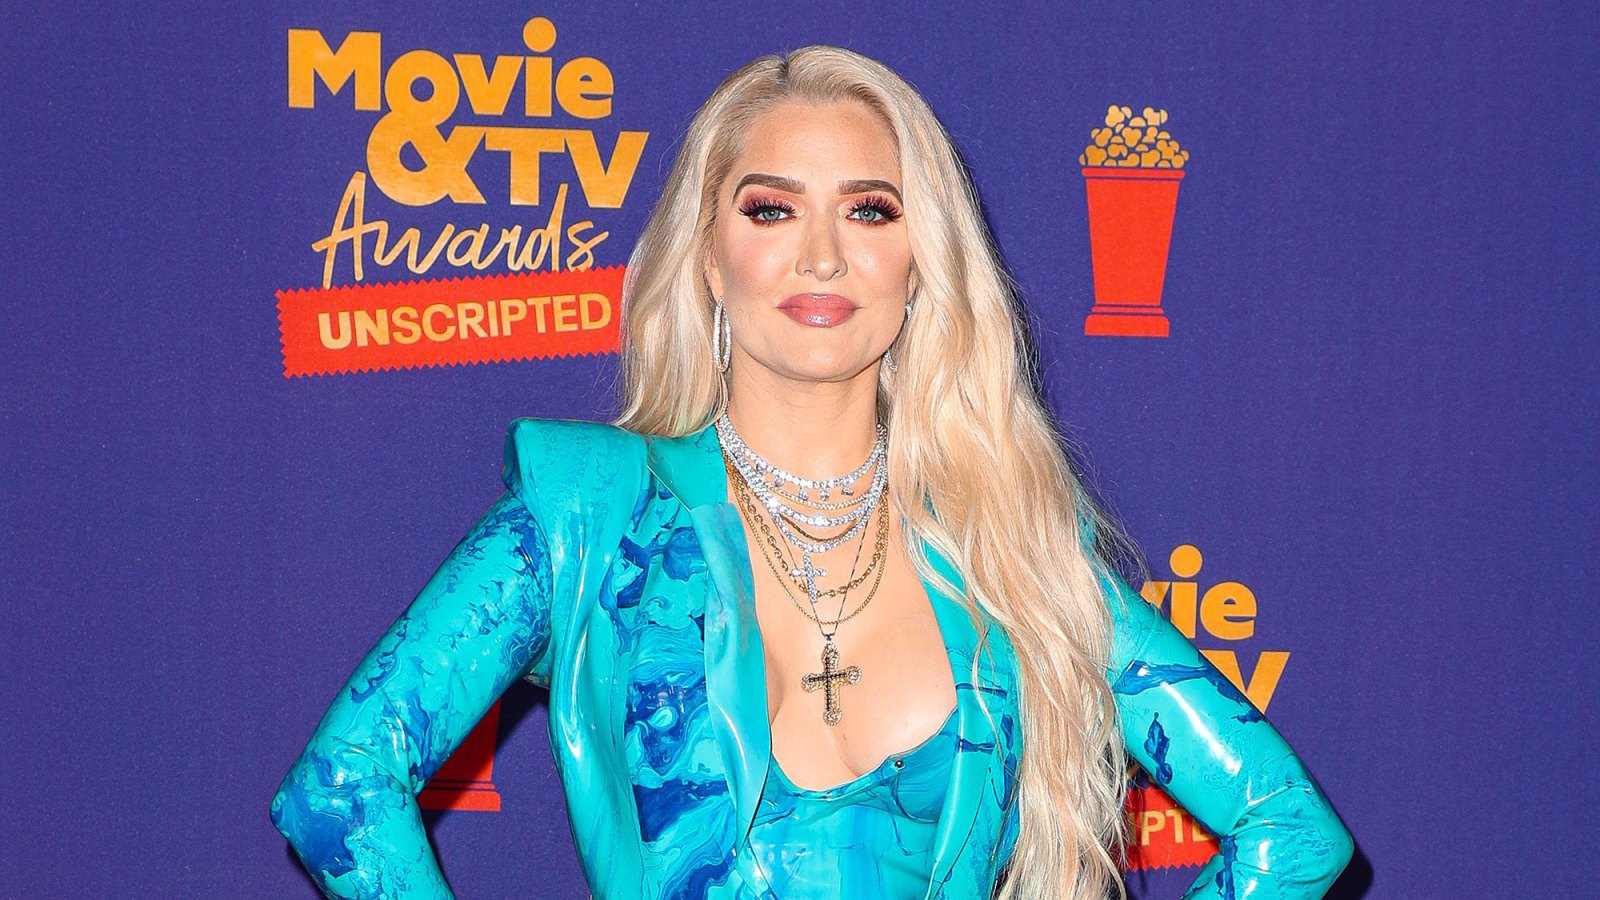 Erika Jayne 'Definitely' Isn't Watching the 'RHOBH' Reunion: 'She Doesn't Want to Relive' the Drama